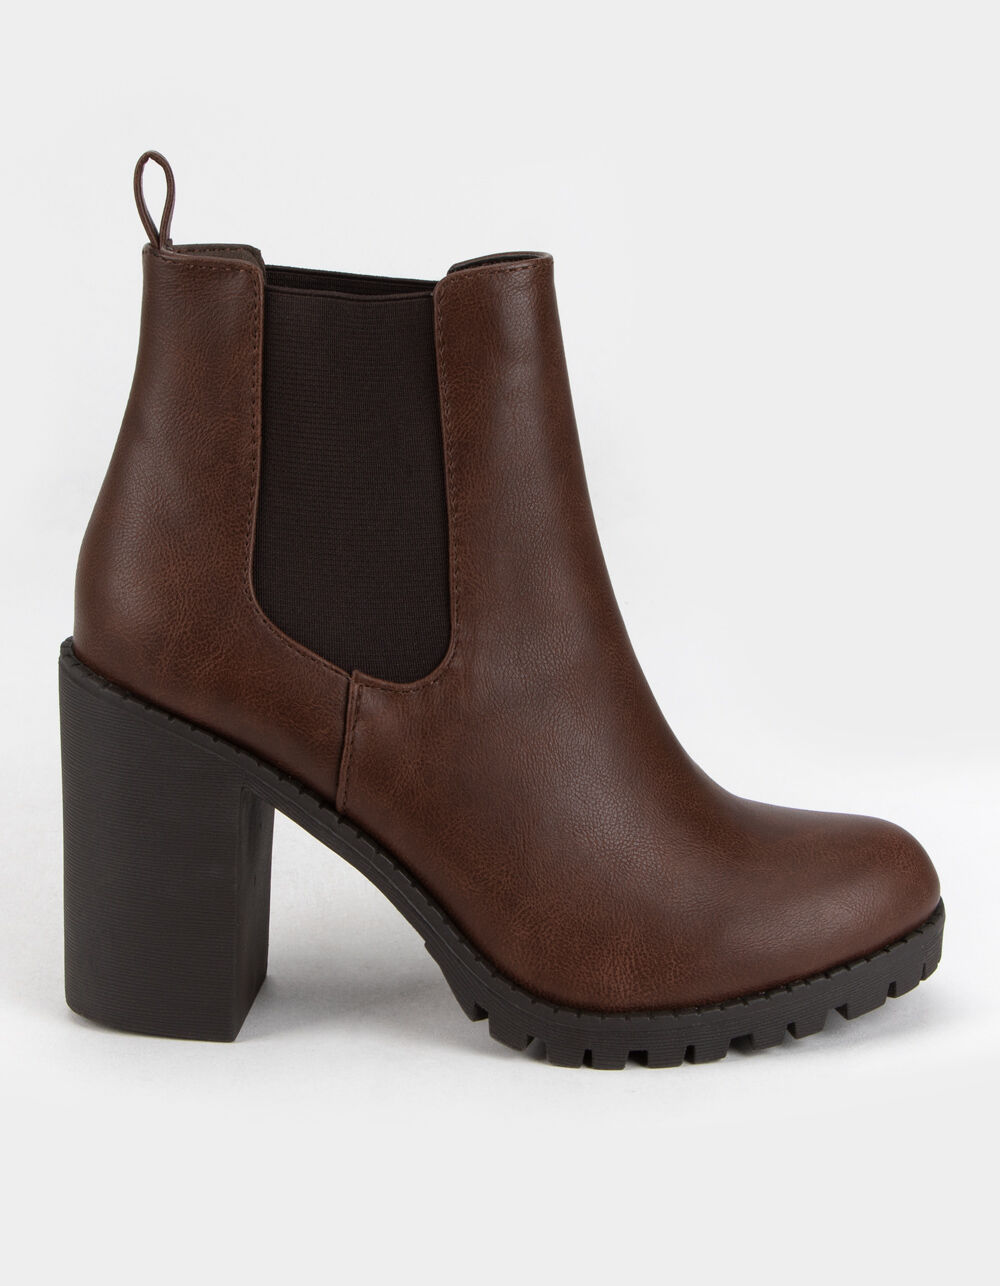 SODA Lug Sole Double Gore Womens Brown Ankle Boots - BROWN | Tillys